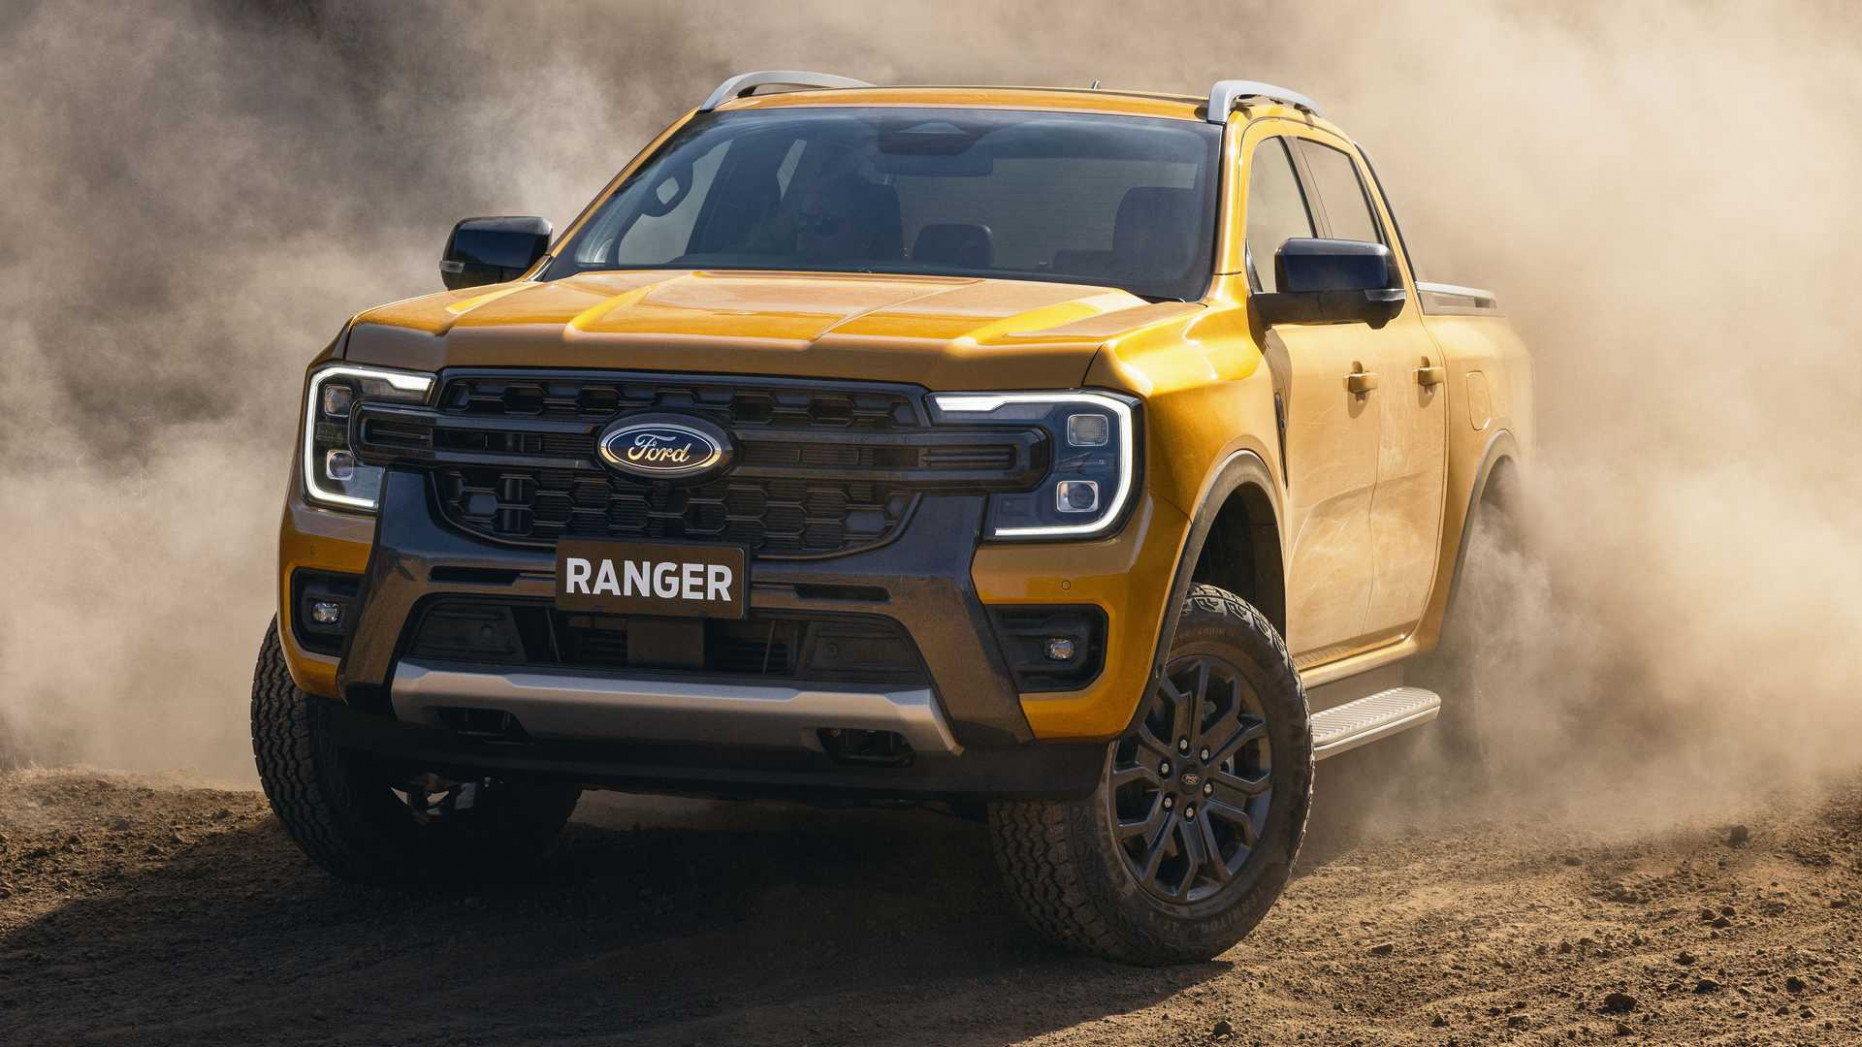 Performance and New Engine 2022 ford ranger price